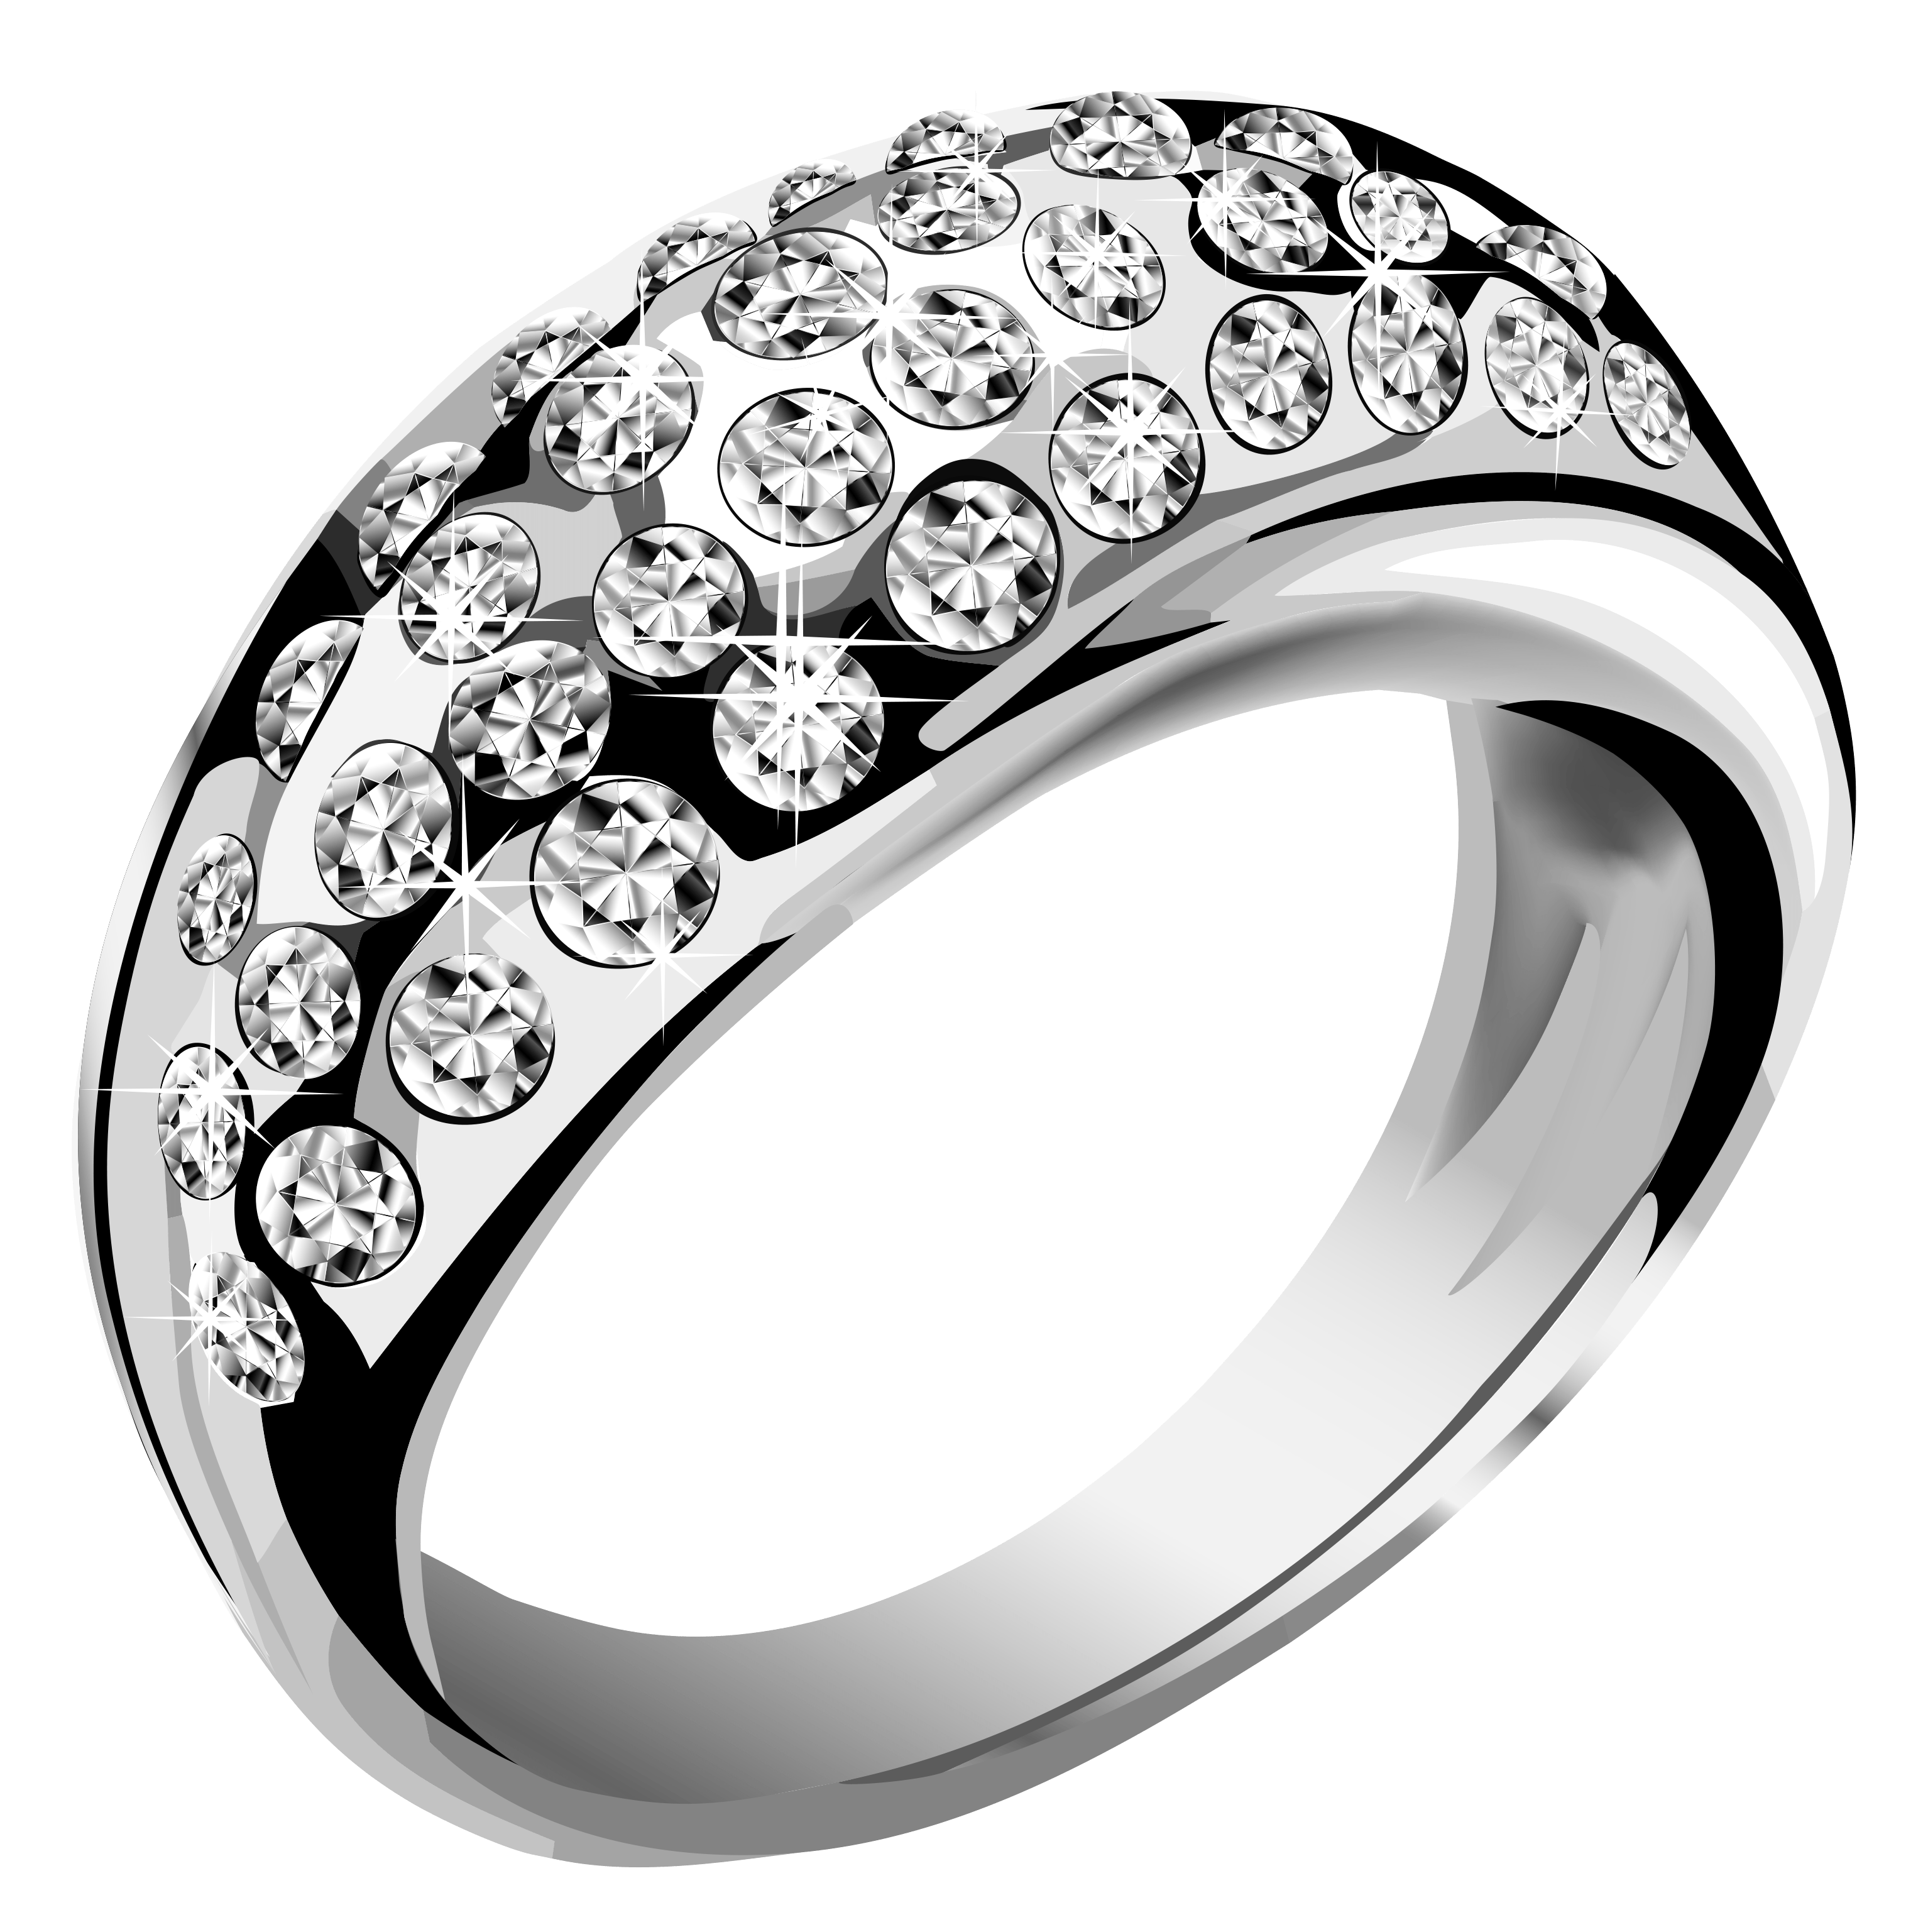 Download Silver Ring With Diamonds Png HQ PNG Image | FreePNGImg